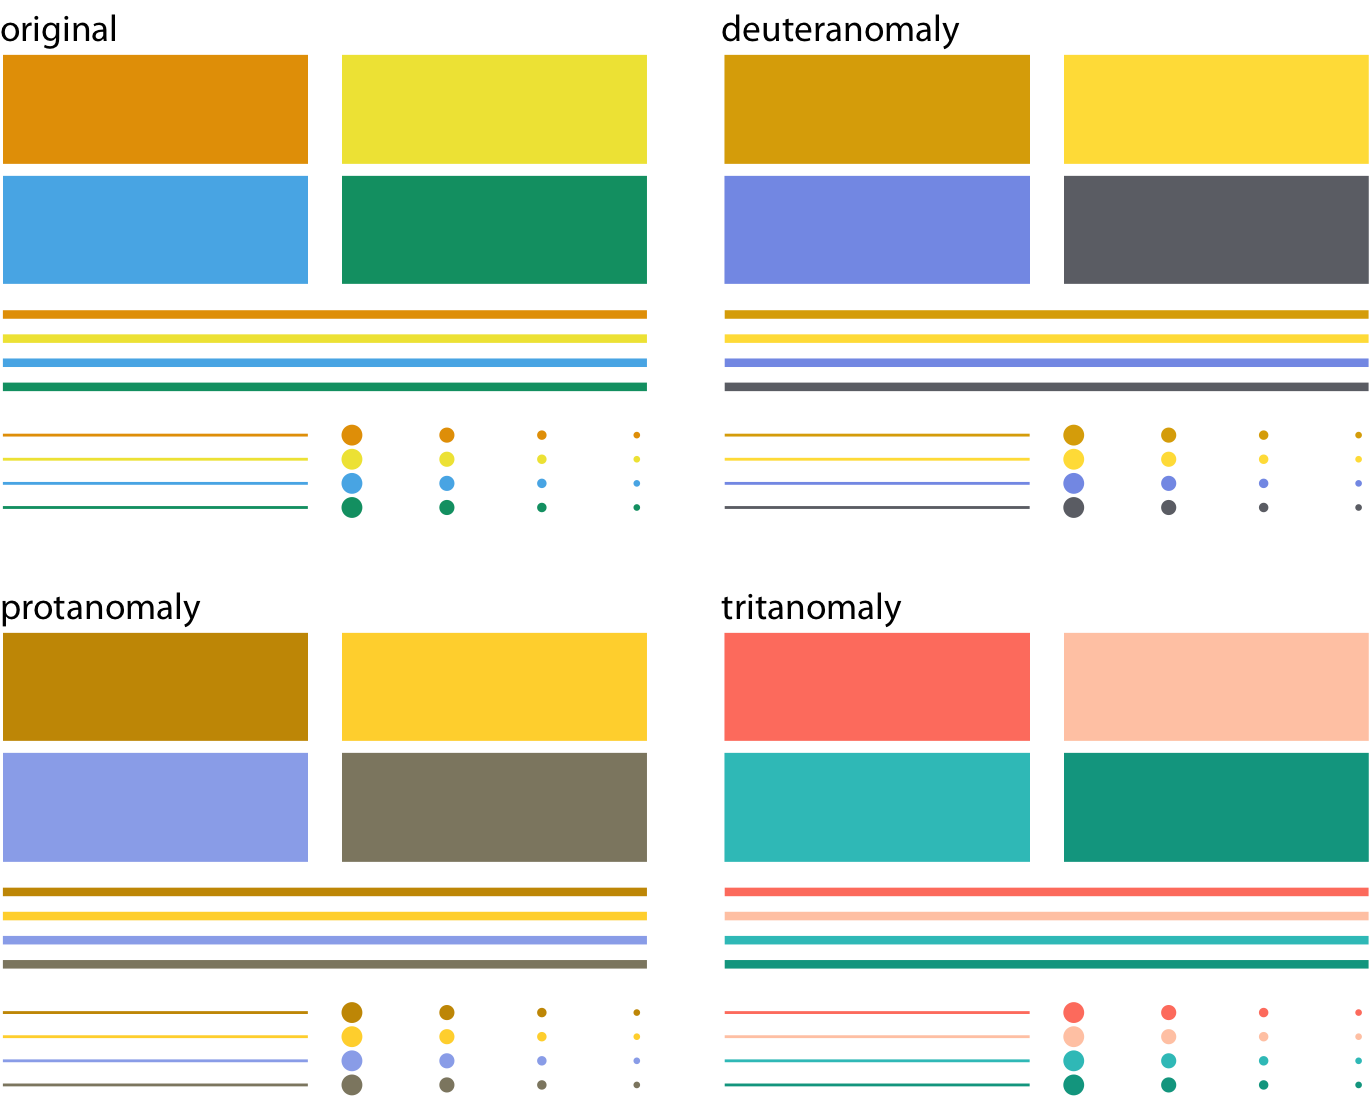 https://clauswilke.com/dataviz/pitfalls_of_color_use_files/figure-html/colors-thin-lines-1.png